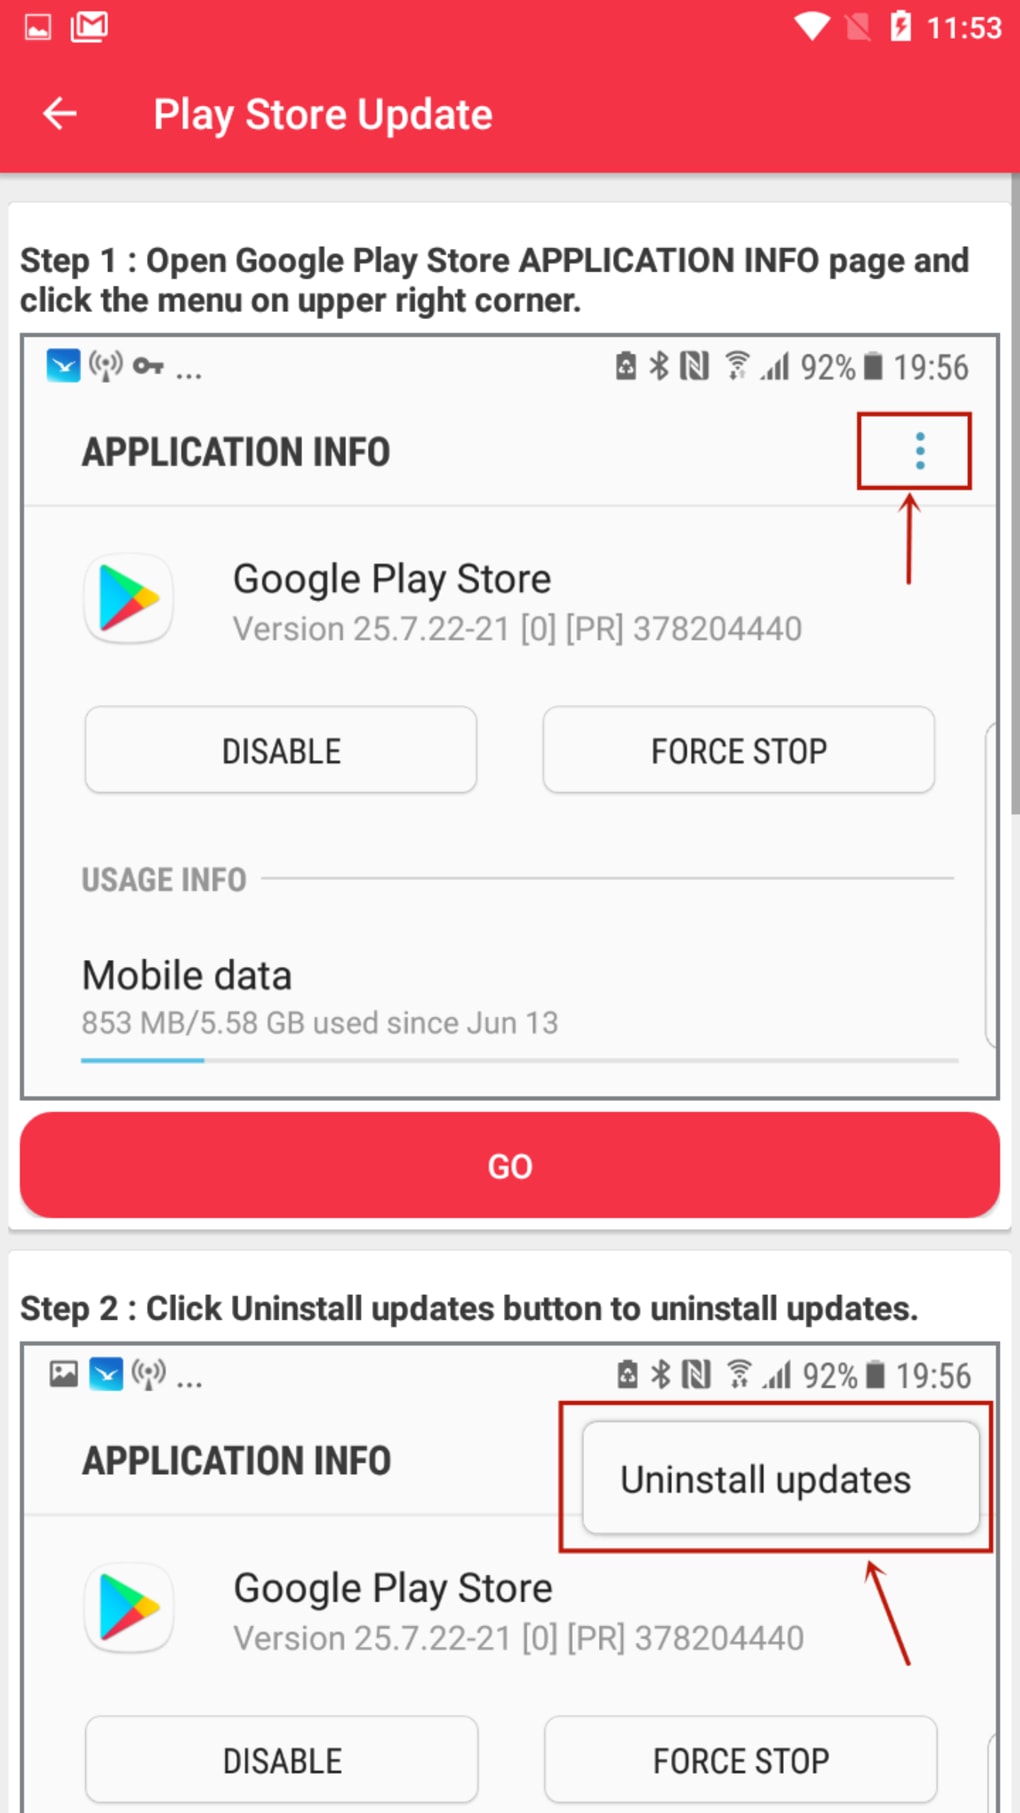 Google Play Store 9.0.15 APK Download For Android Released